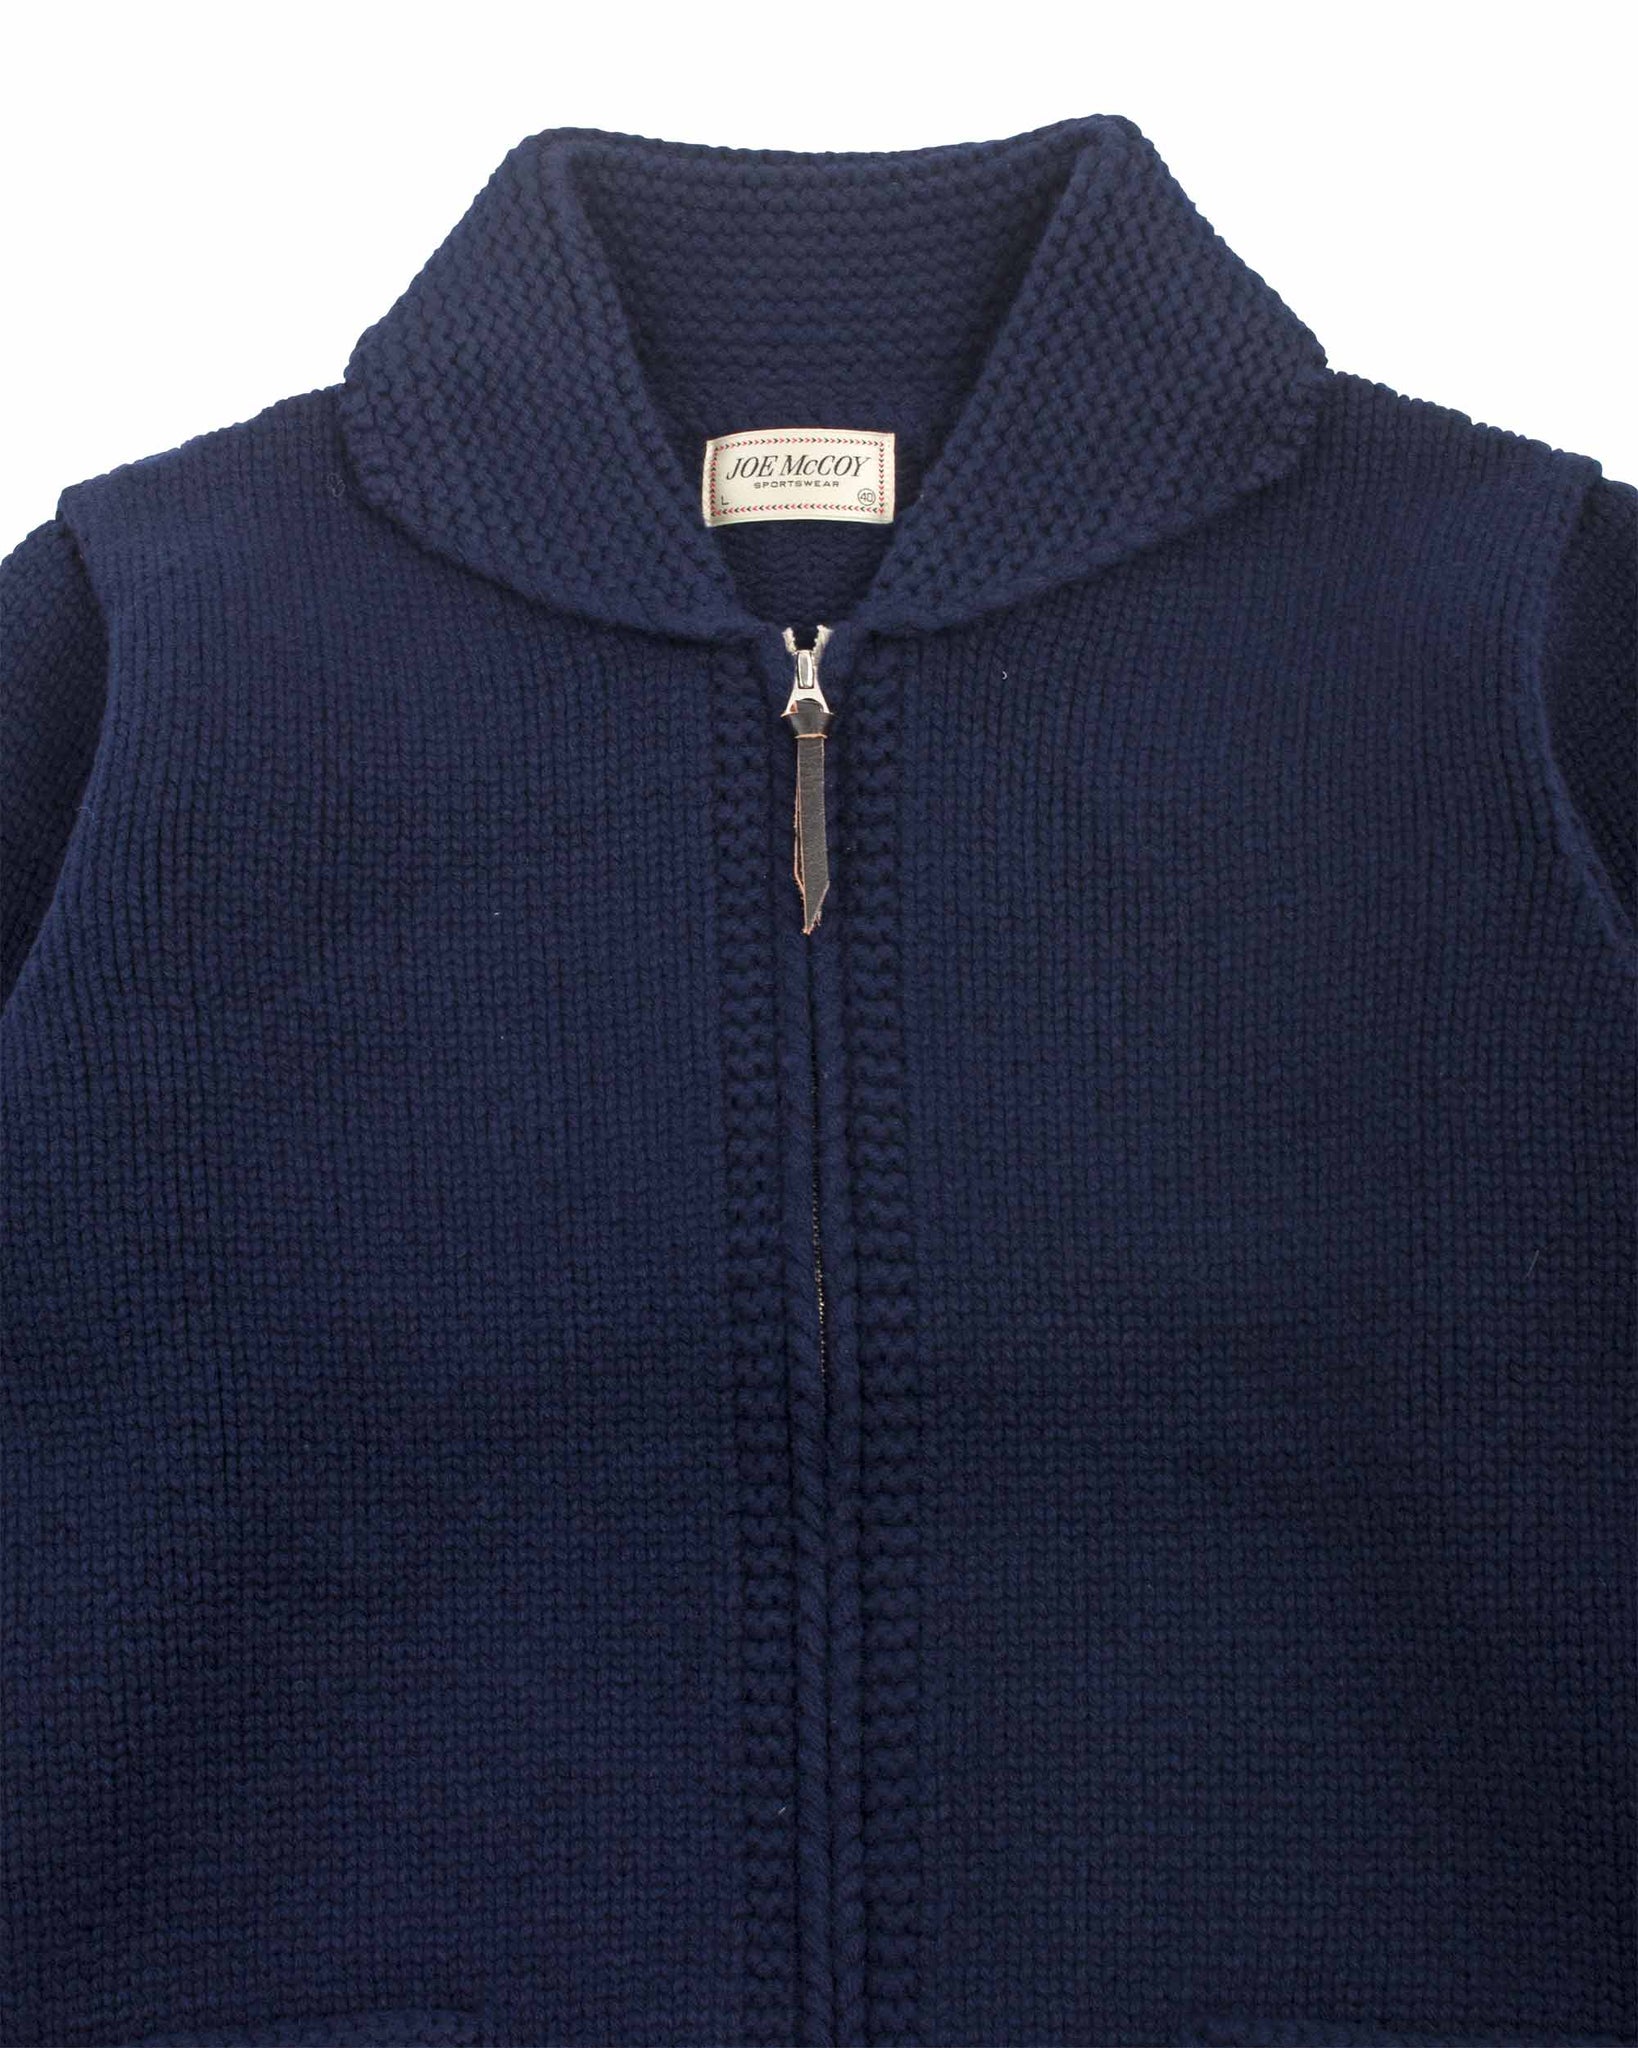 The Real McCoy's MC21113 Heavy Wool Cashmere Sweater Navy